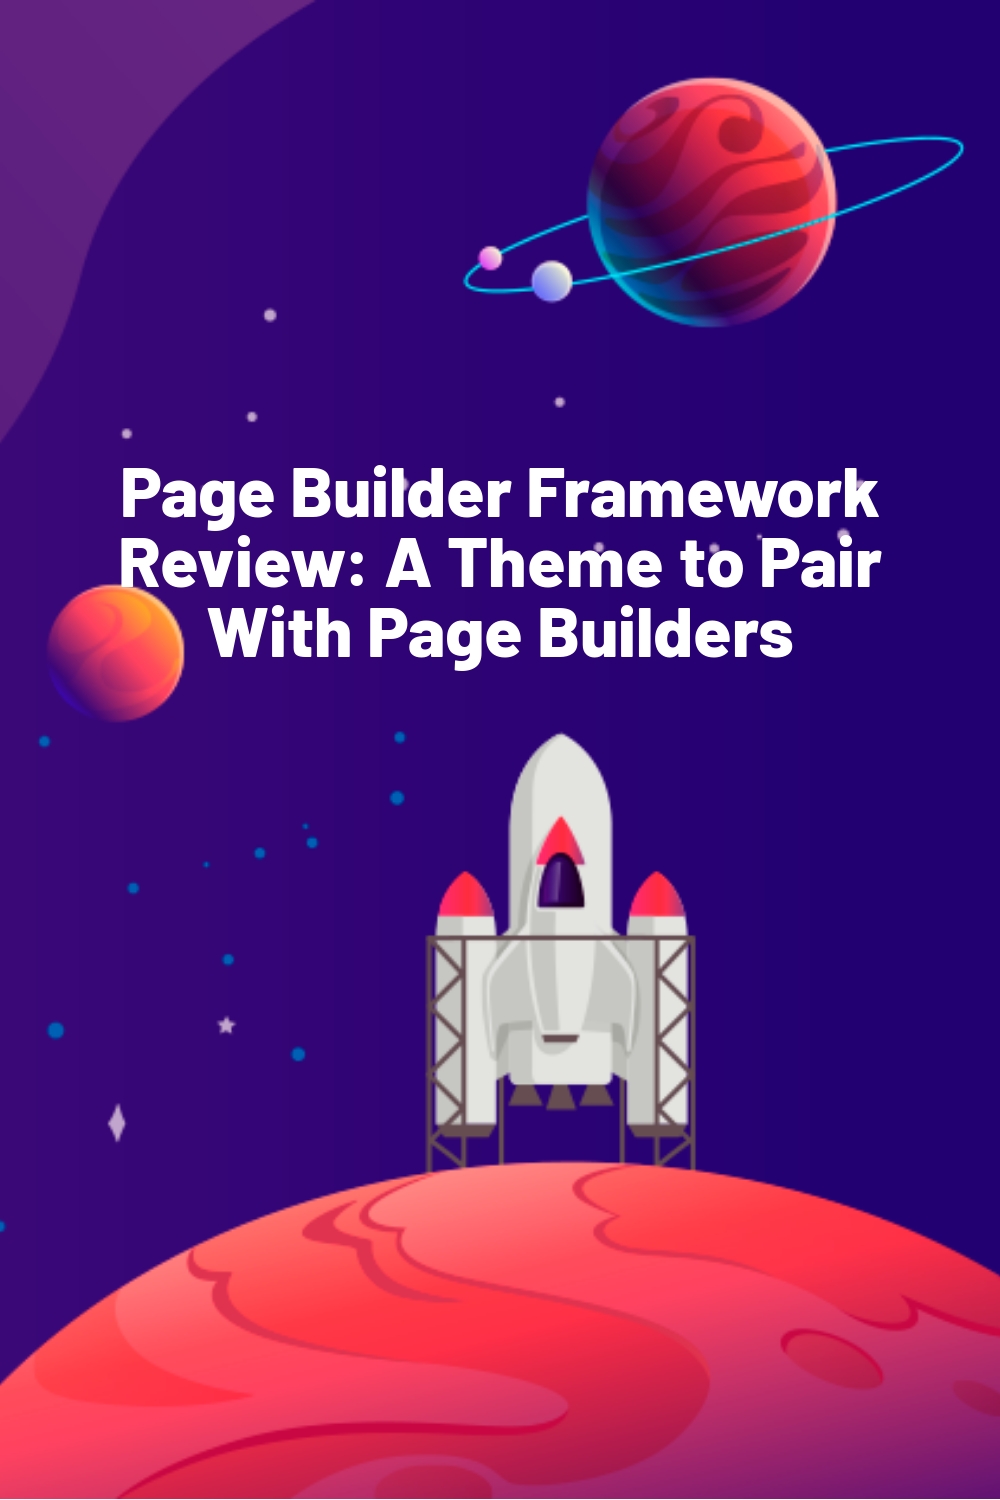 Page Builder Framework Review: A Theme to Pair With Page Builders